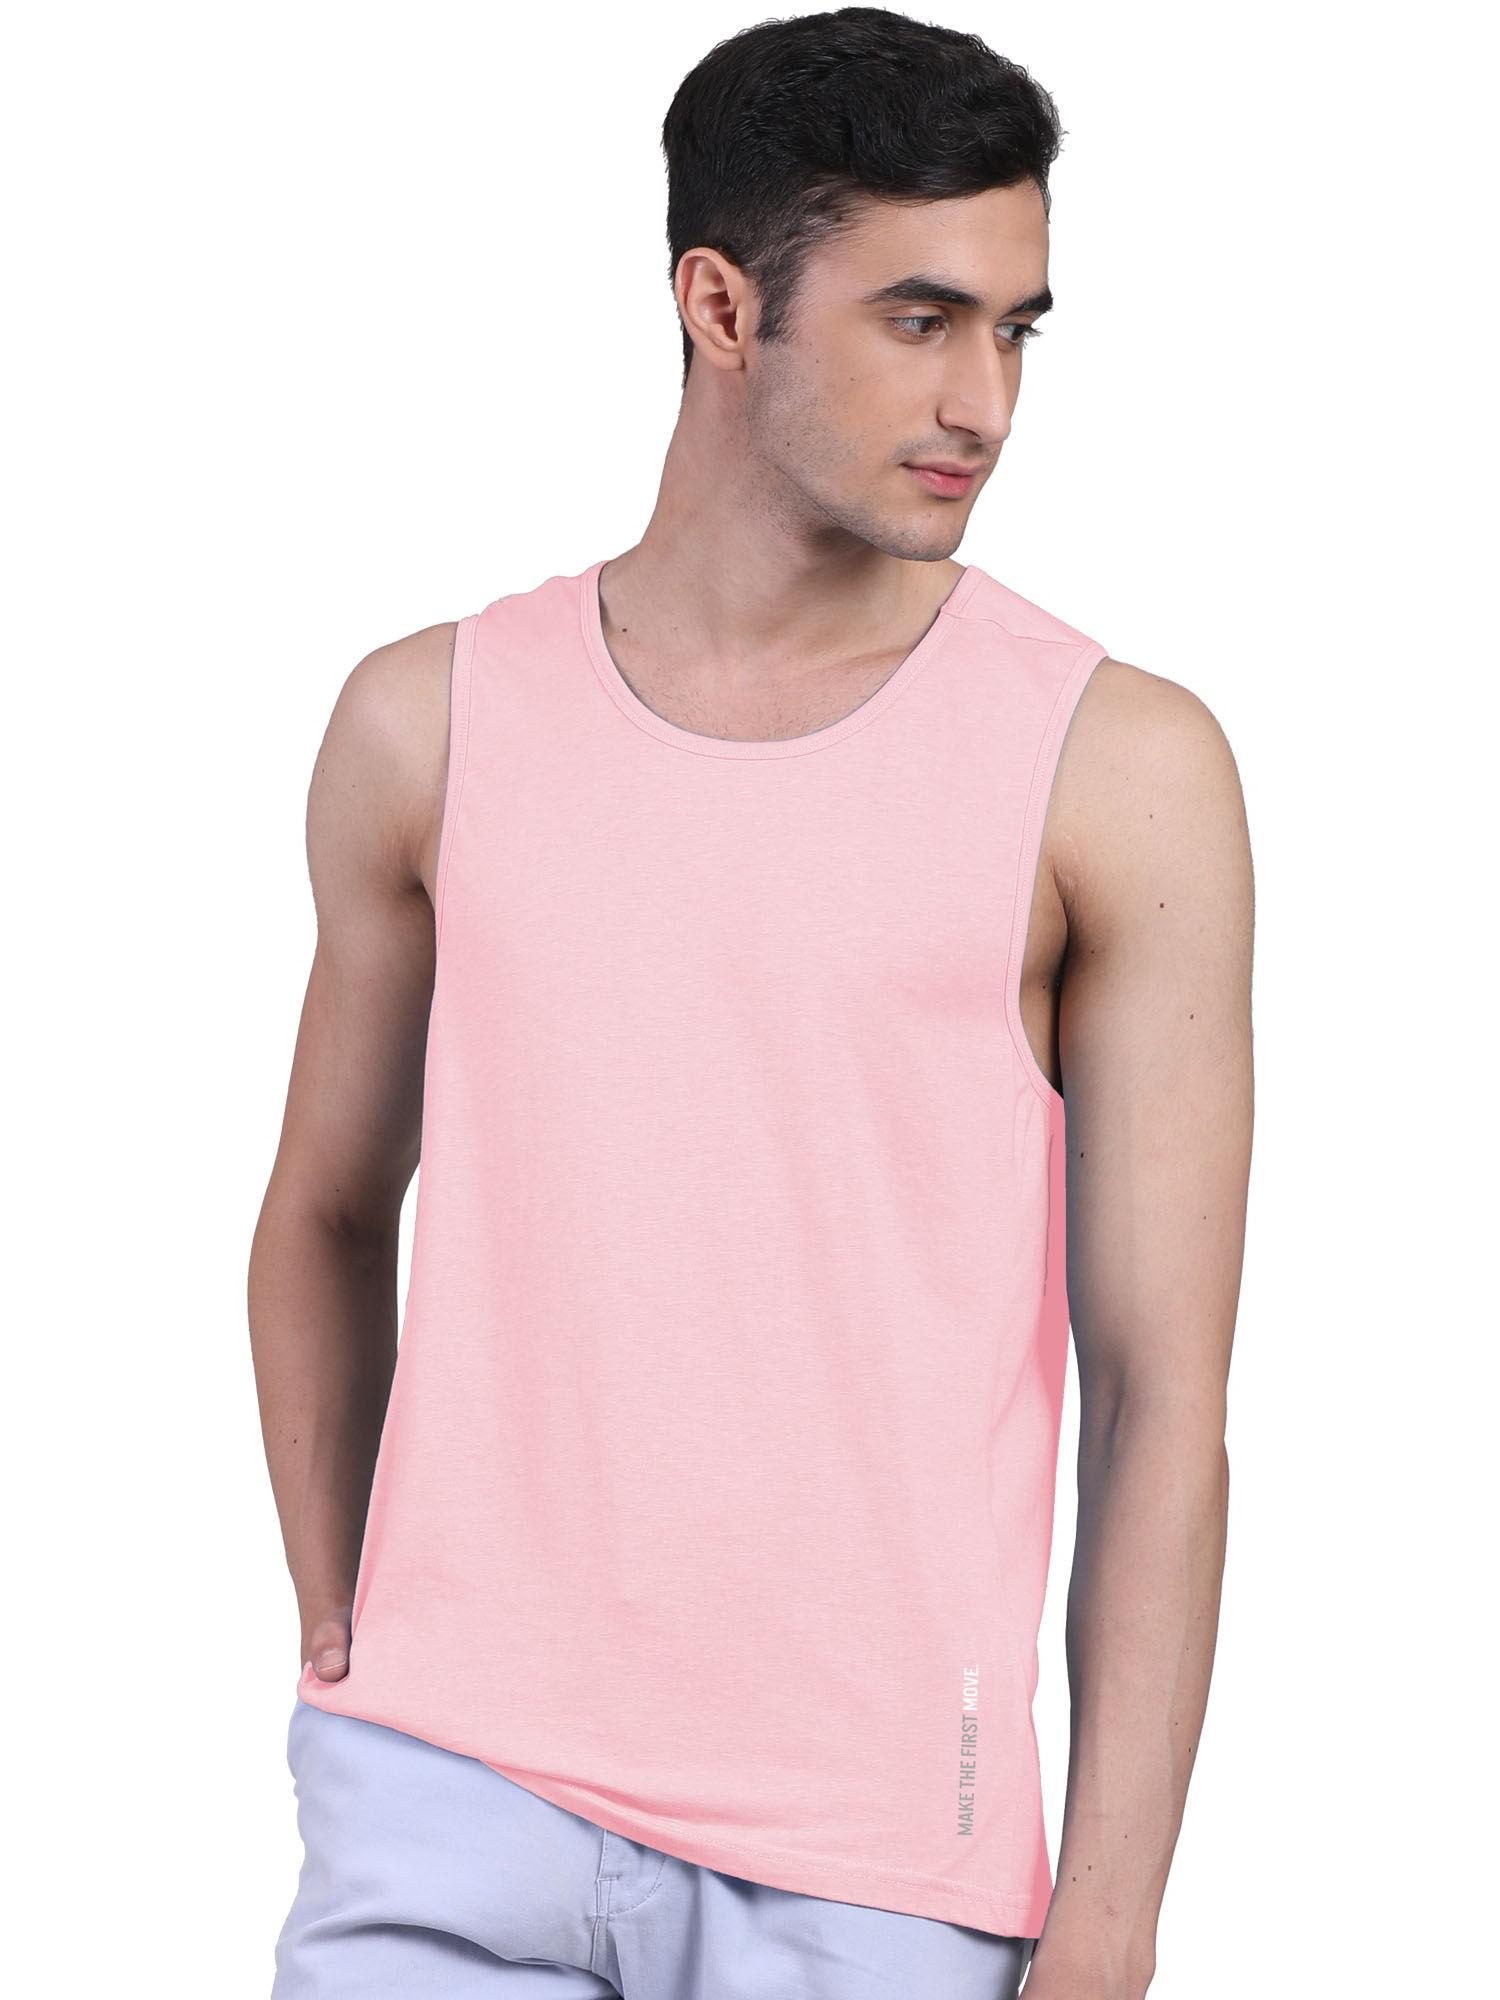 mens twin skin bamboo cotton anti microbial active vest peach